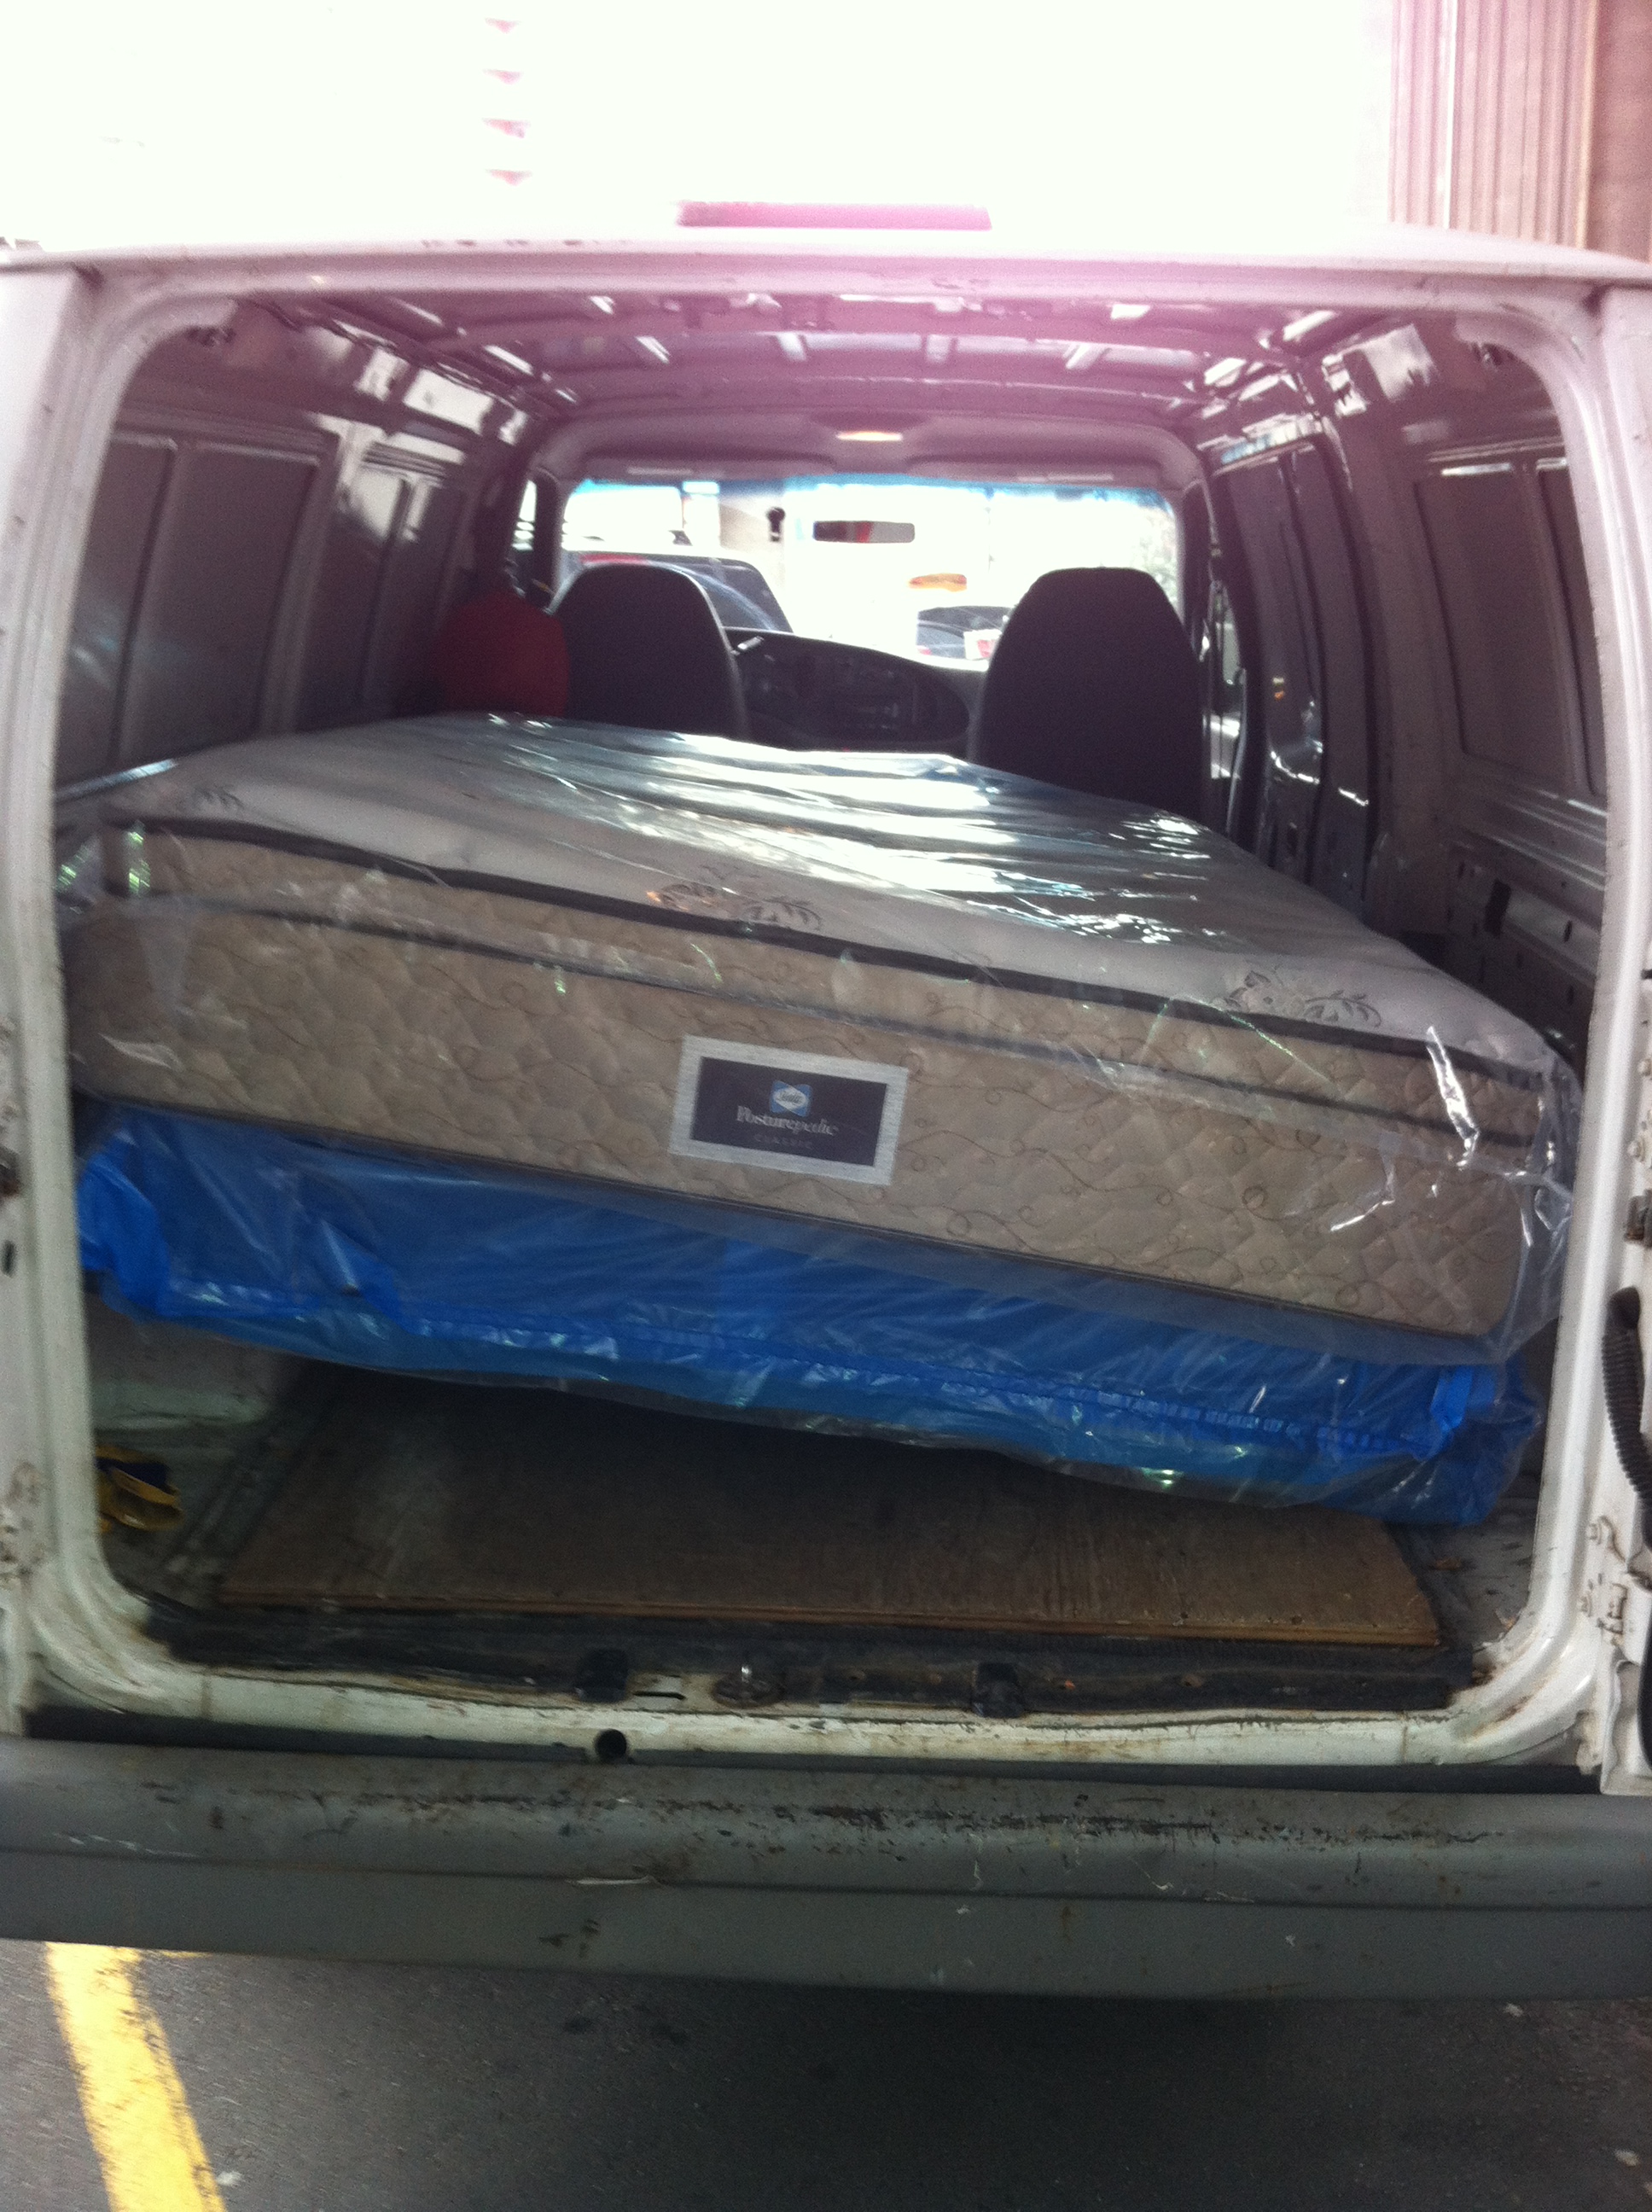 Downtown Vancouver Costco Queen Mattress And Box Spring Pickup and Delivery Sam's Small